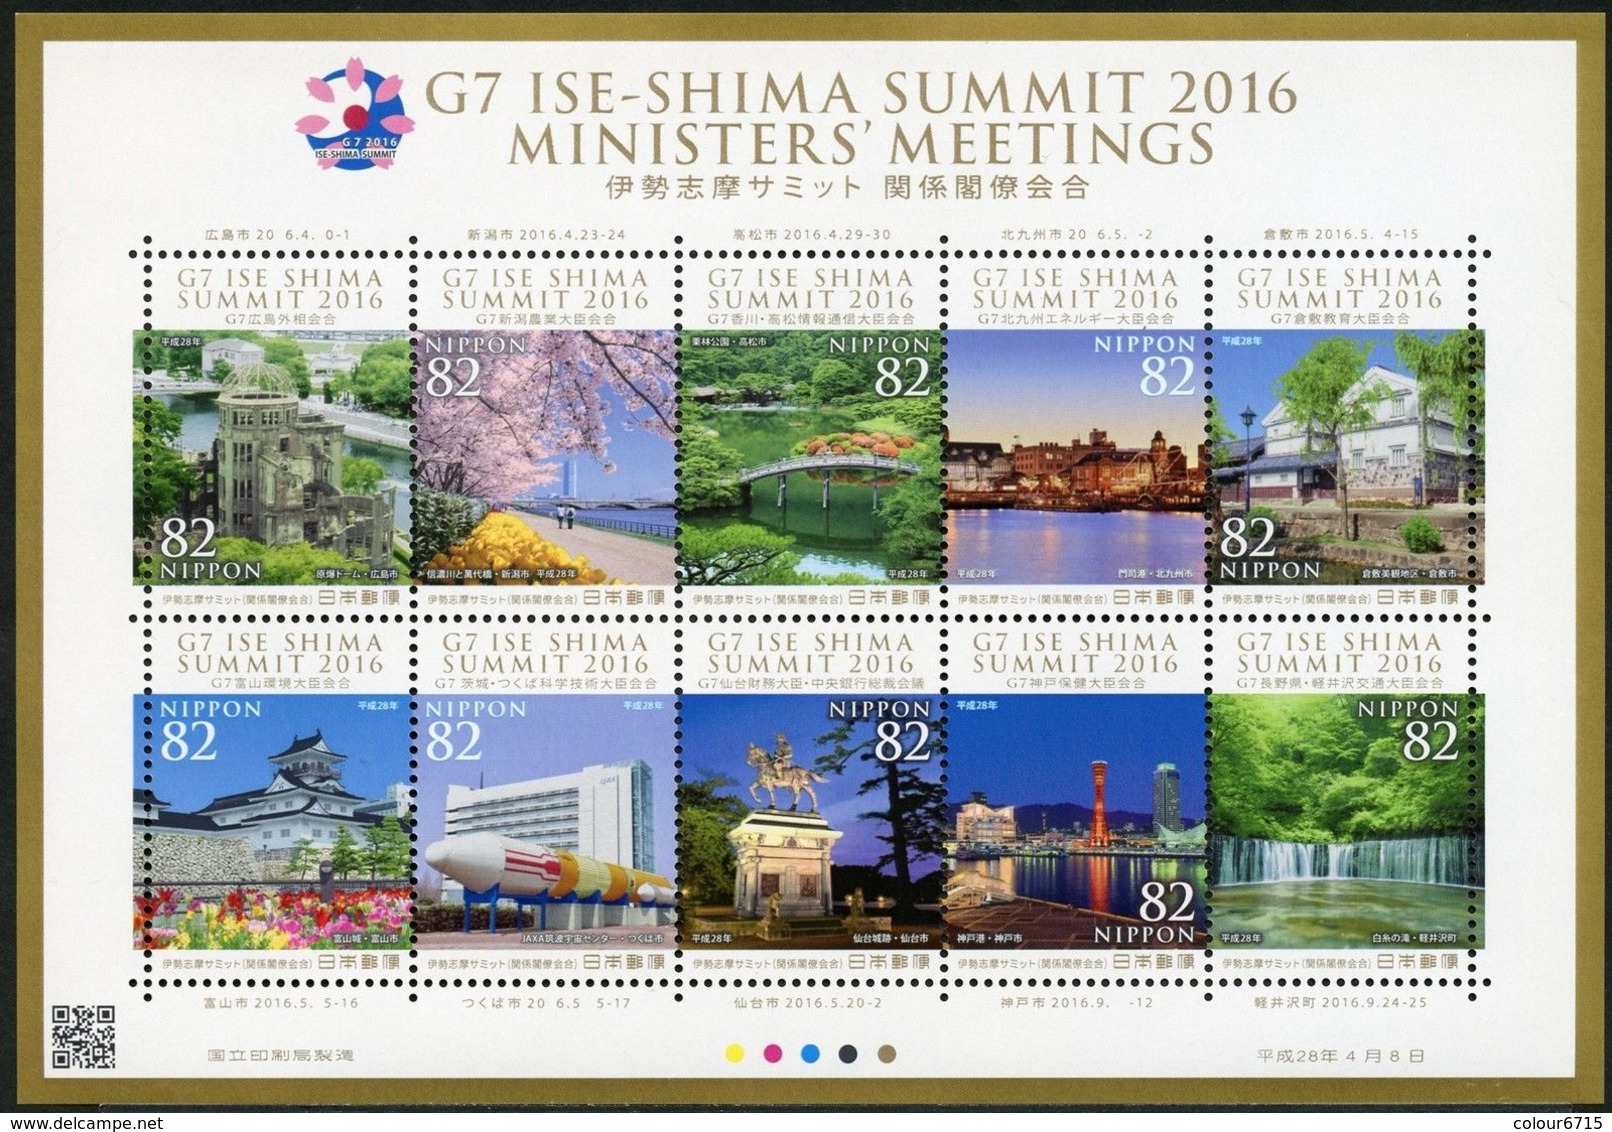 Japan 2016 G7 Ise-Shima Summit Minister's Meetings Stamp Sheetlet (Limited Edition) MNH - Neufs